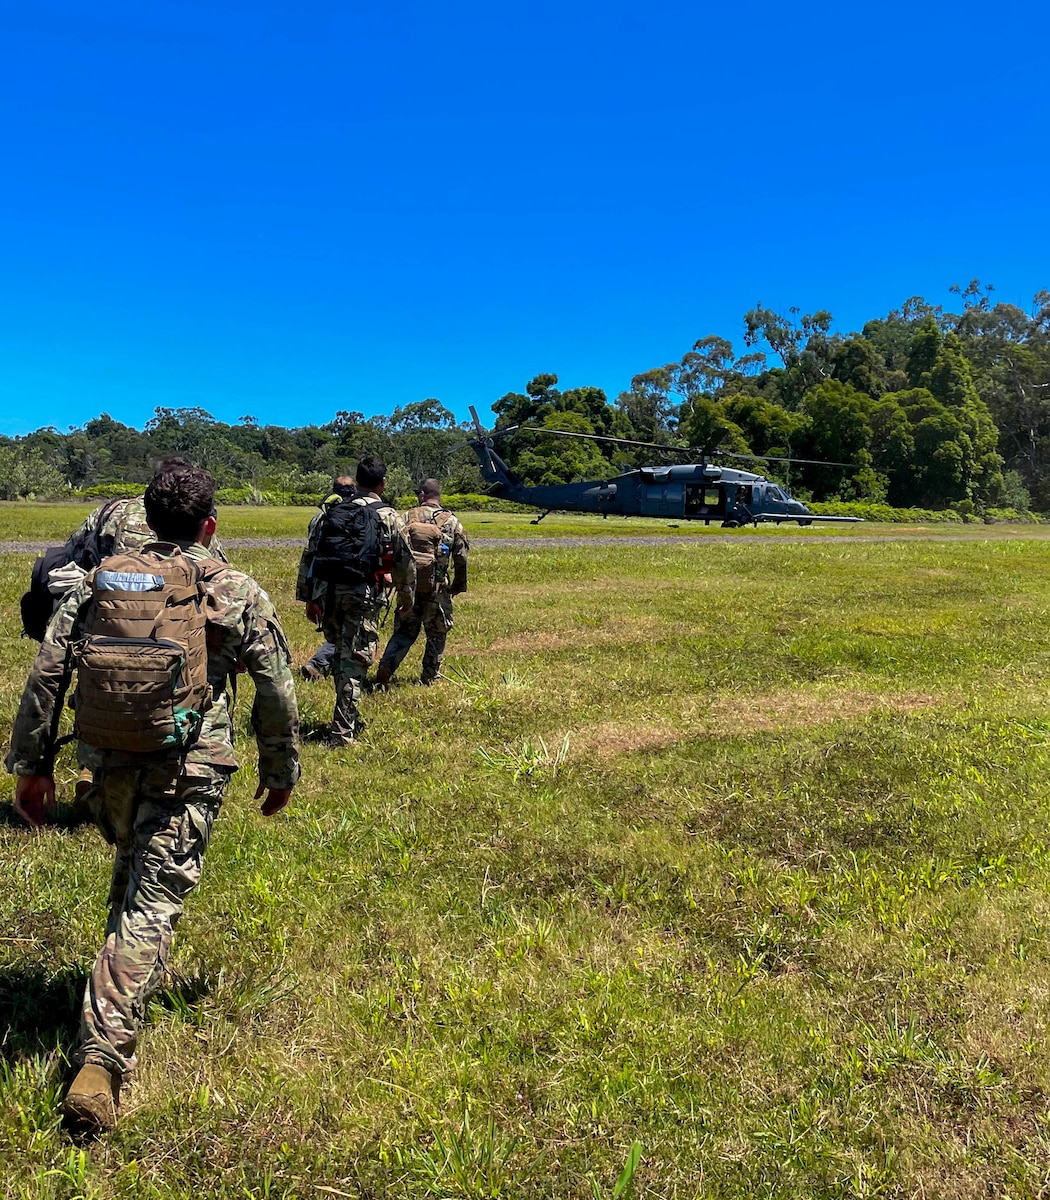 Distant Horizon is an exercise designed to validate tactics, techniques, and procedures of personnel recovery and agile combat employment in the Indo-Pacific region.